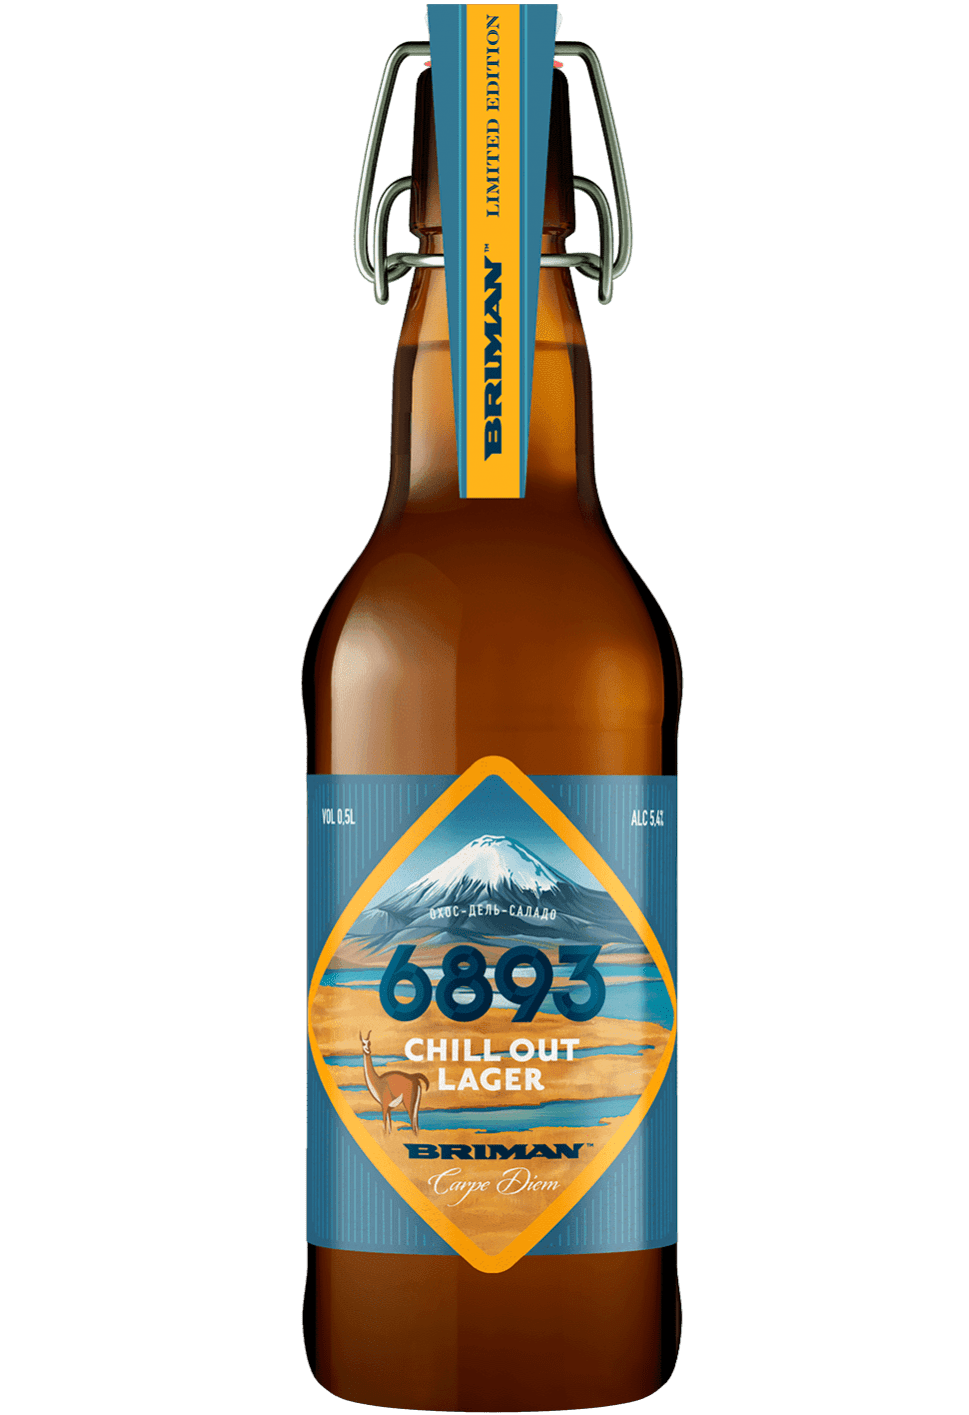 Briman Chill Out Lager 6893